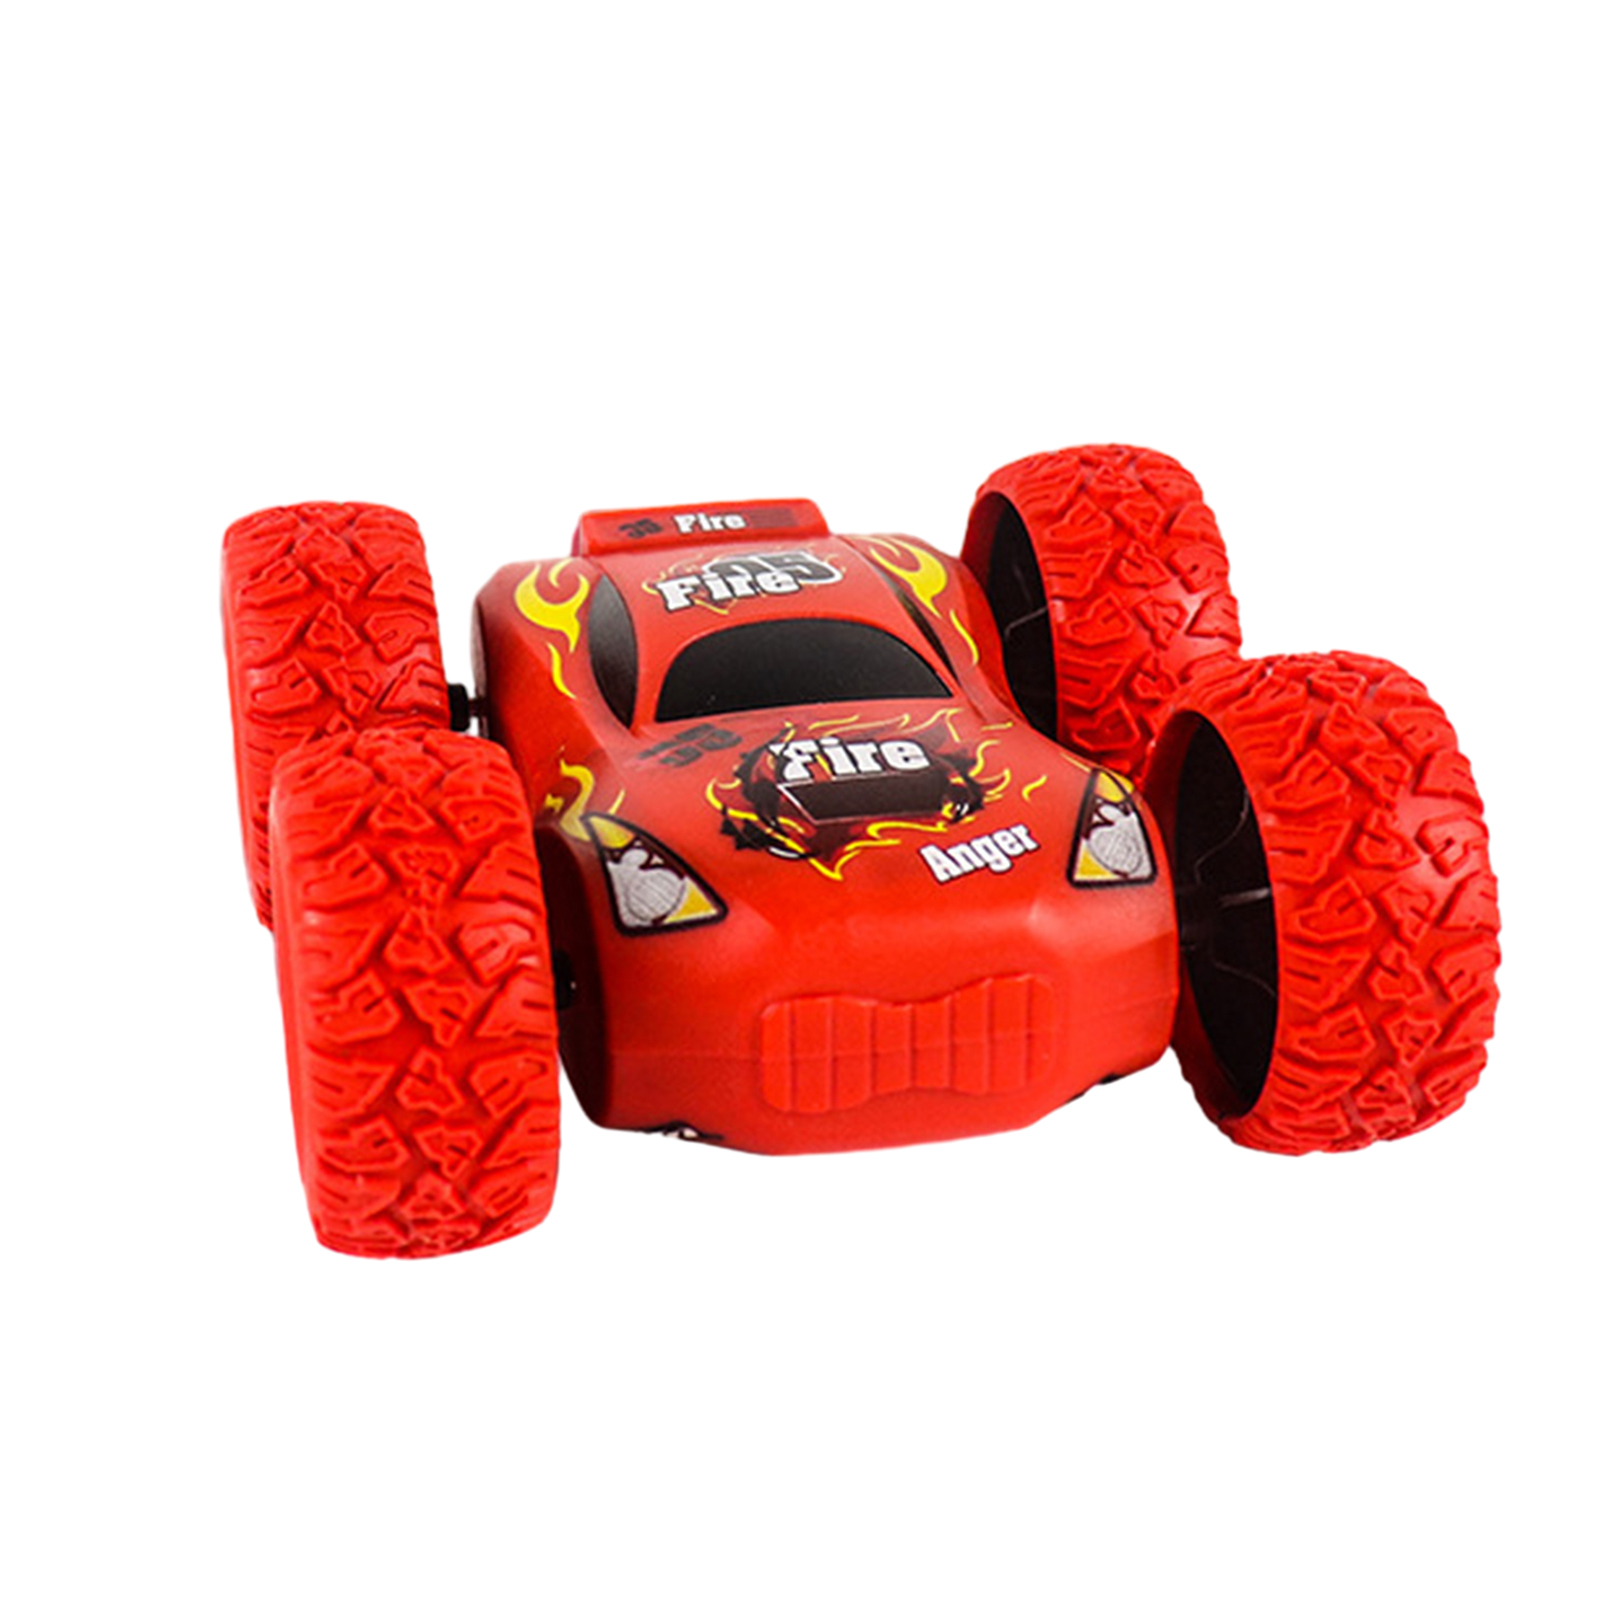 Toddlers Racing Car Toy Push and Go Racing Car Toy Large Rubber Racing Car